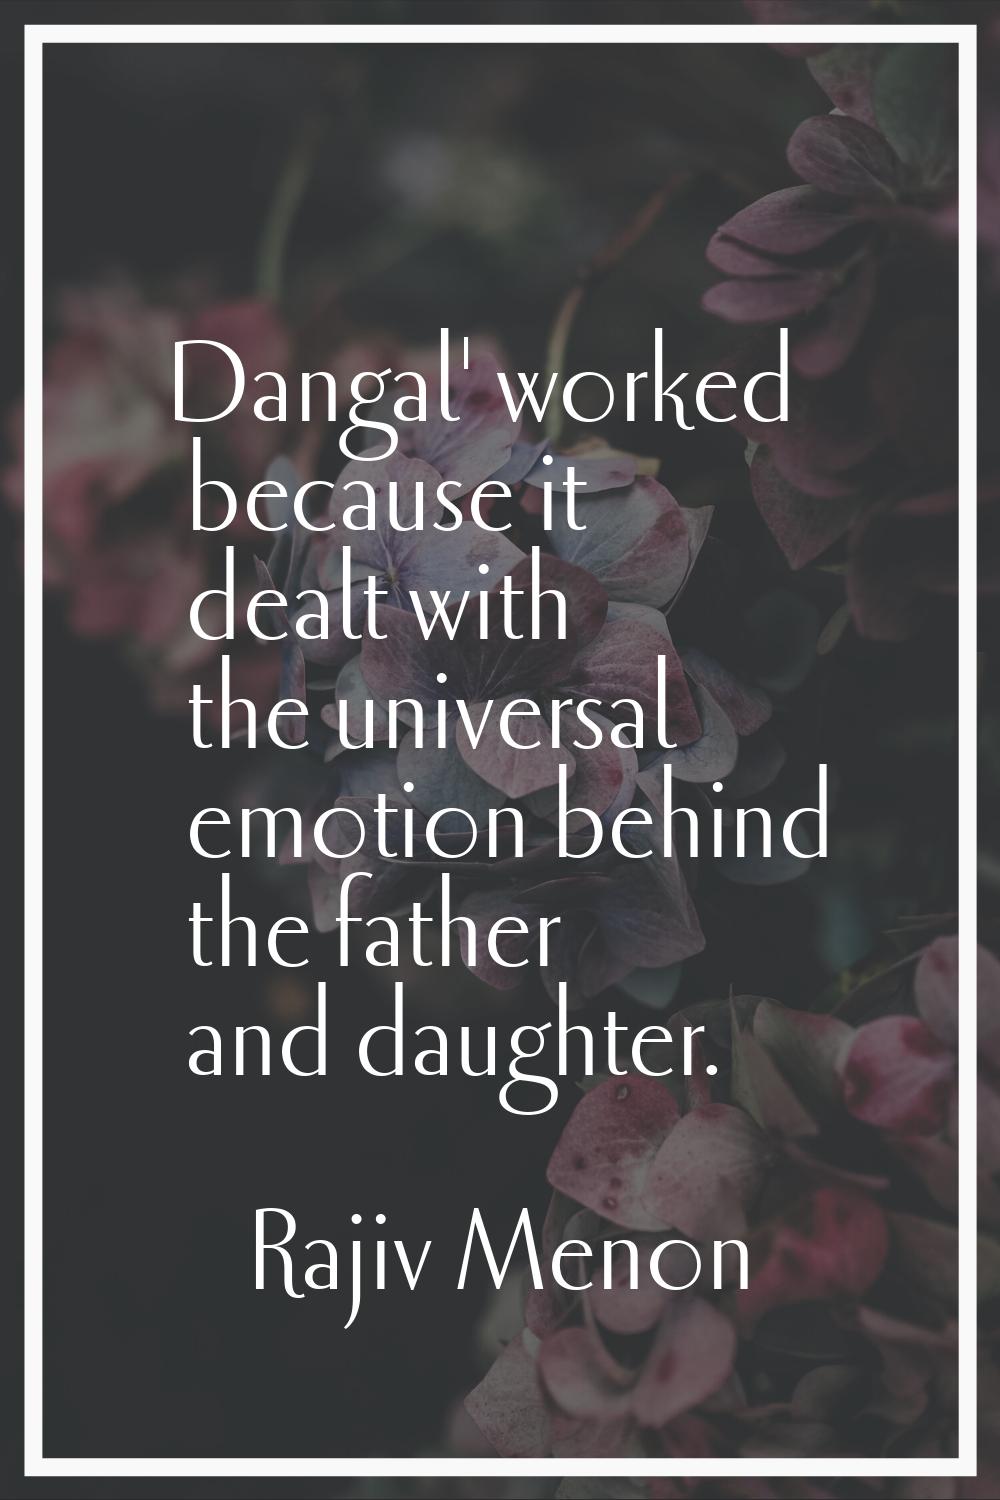 Dangal' worked because it dealt with the universal emotion behind the father and daughter.